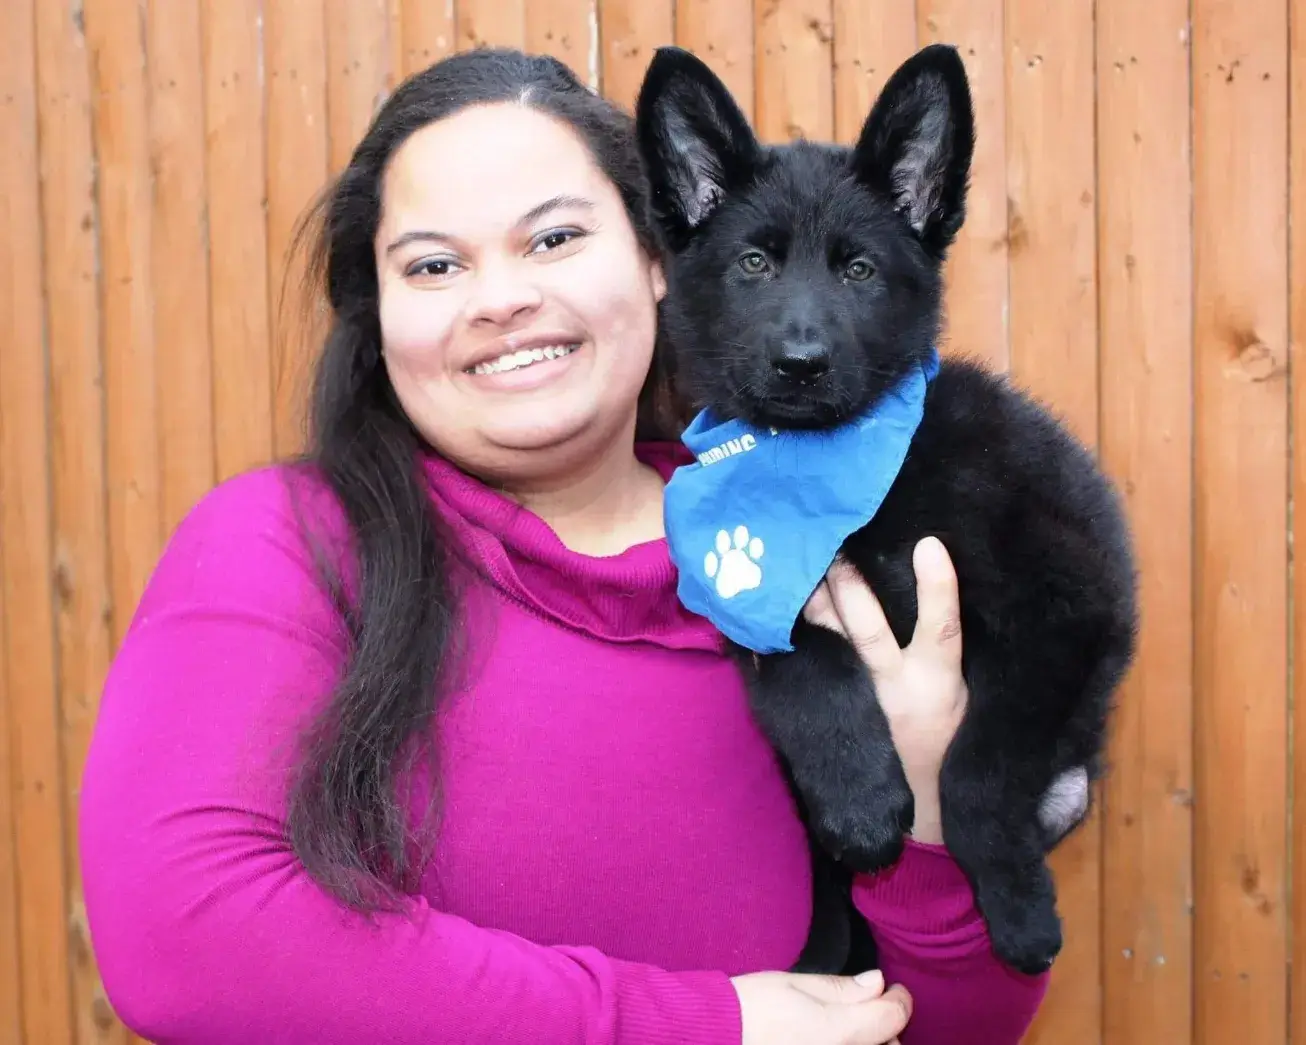 MeKalea holds black German Shepherd puppy Reagan in her arms. Reagan is wearing a blue bandana and looks toward the camera with pricked ears.